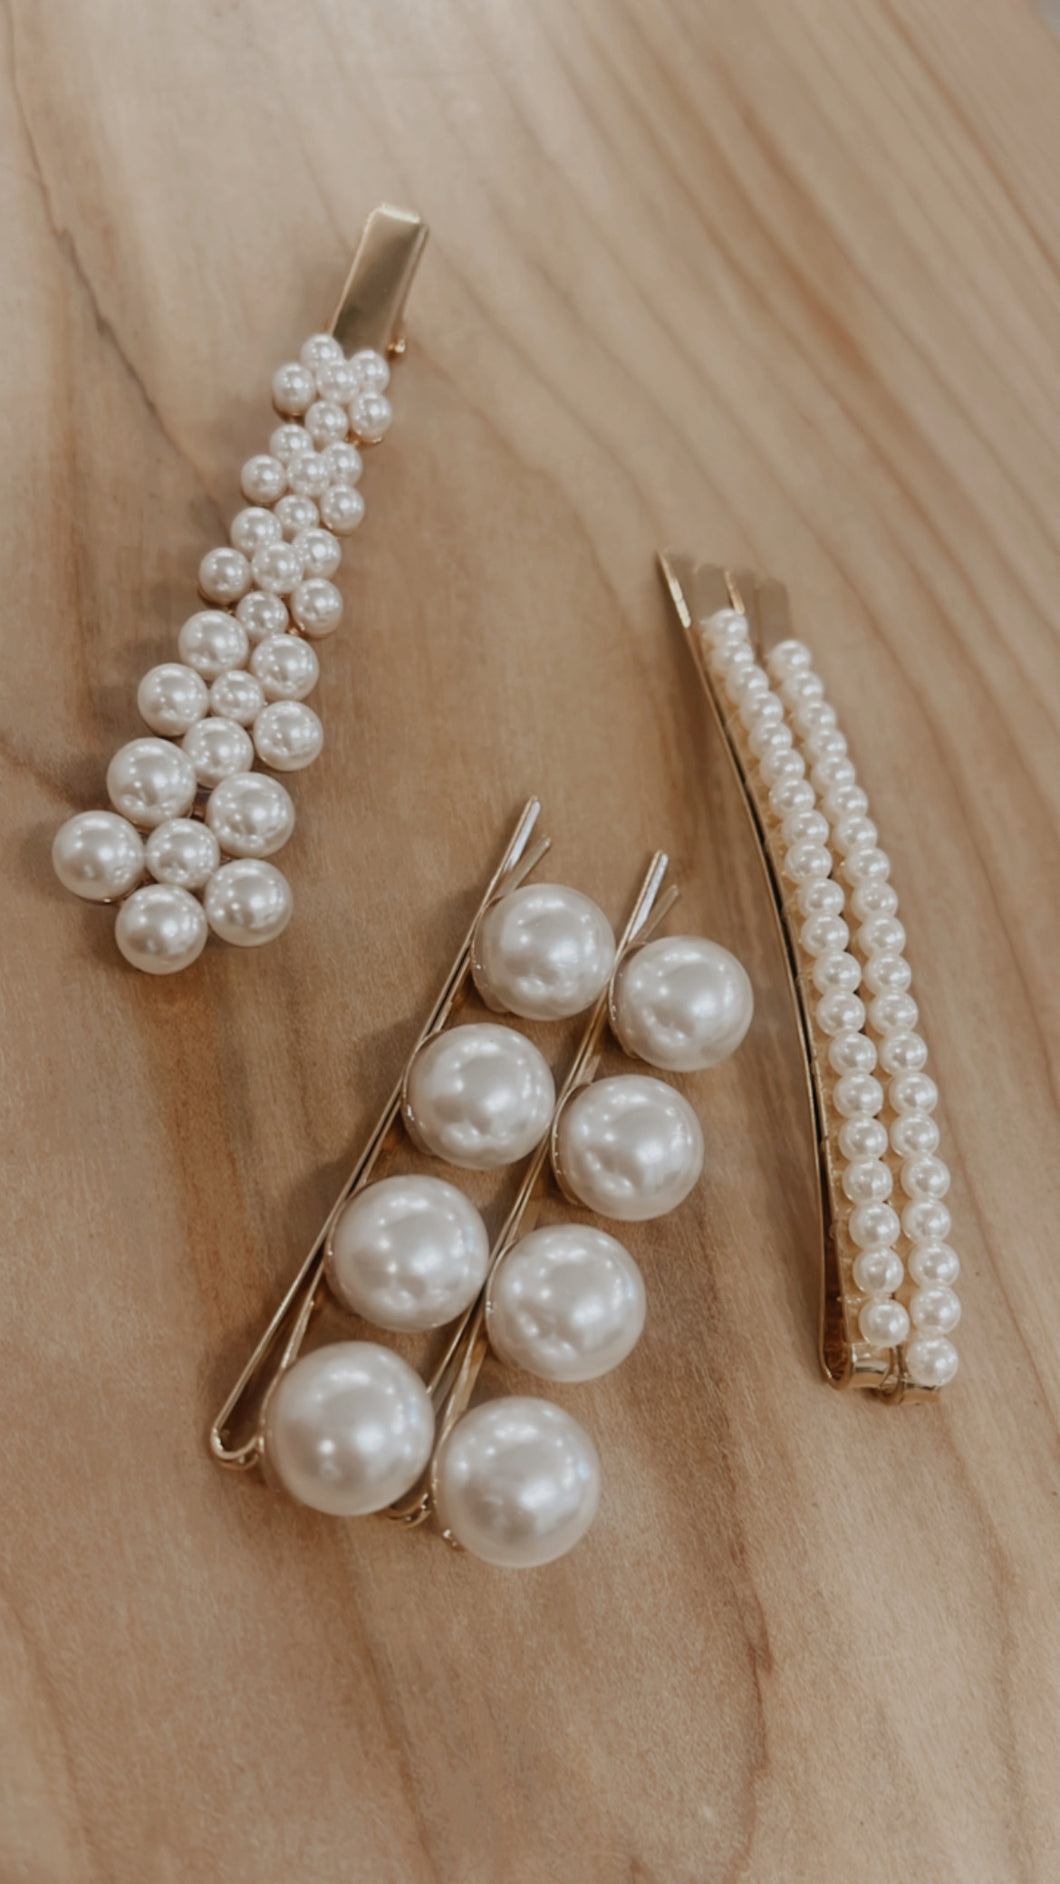 The “Pearla” Hairpin Collection